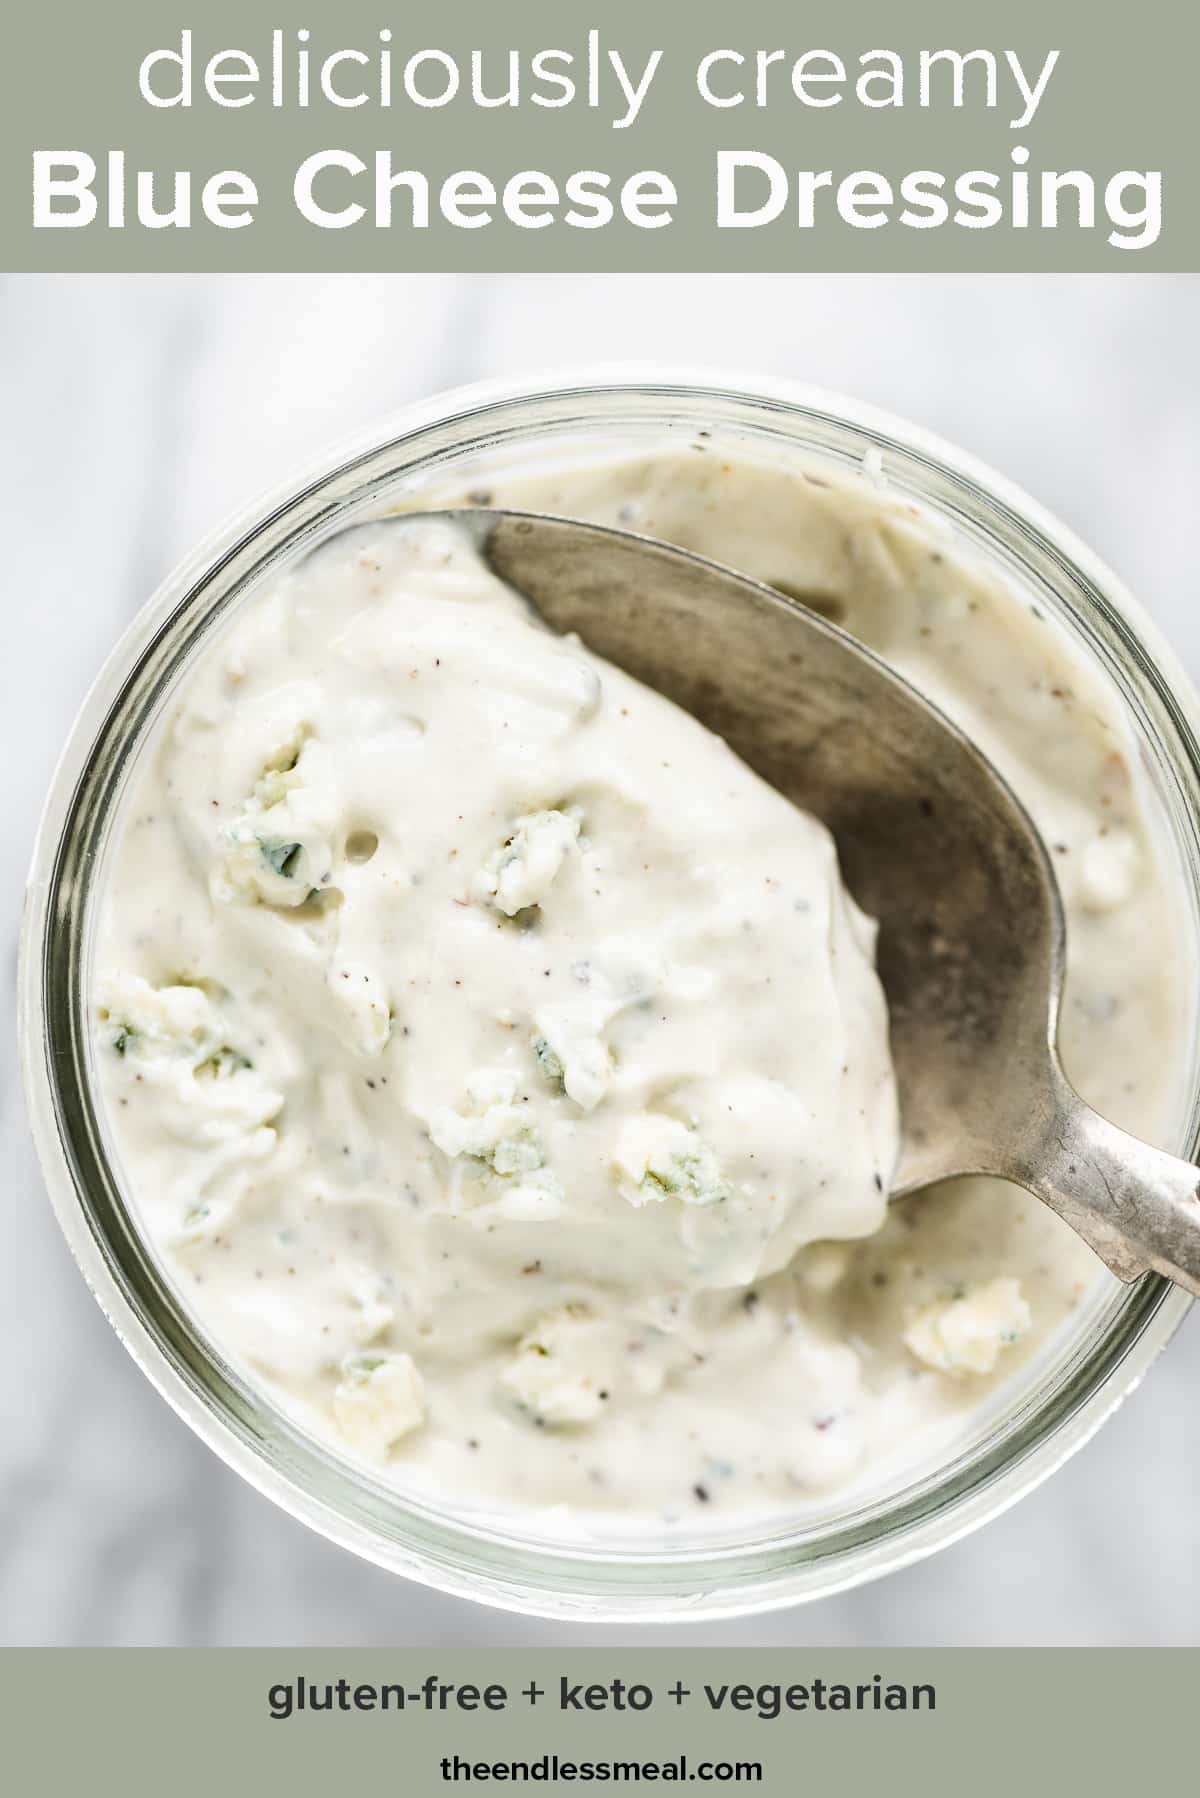 Blue cheese dressing in a jar with a spoon taking a scoop and the recipe title on top of the picture.